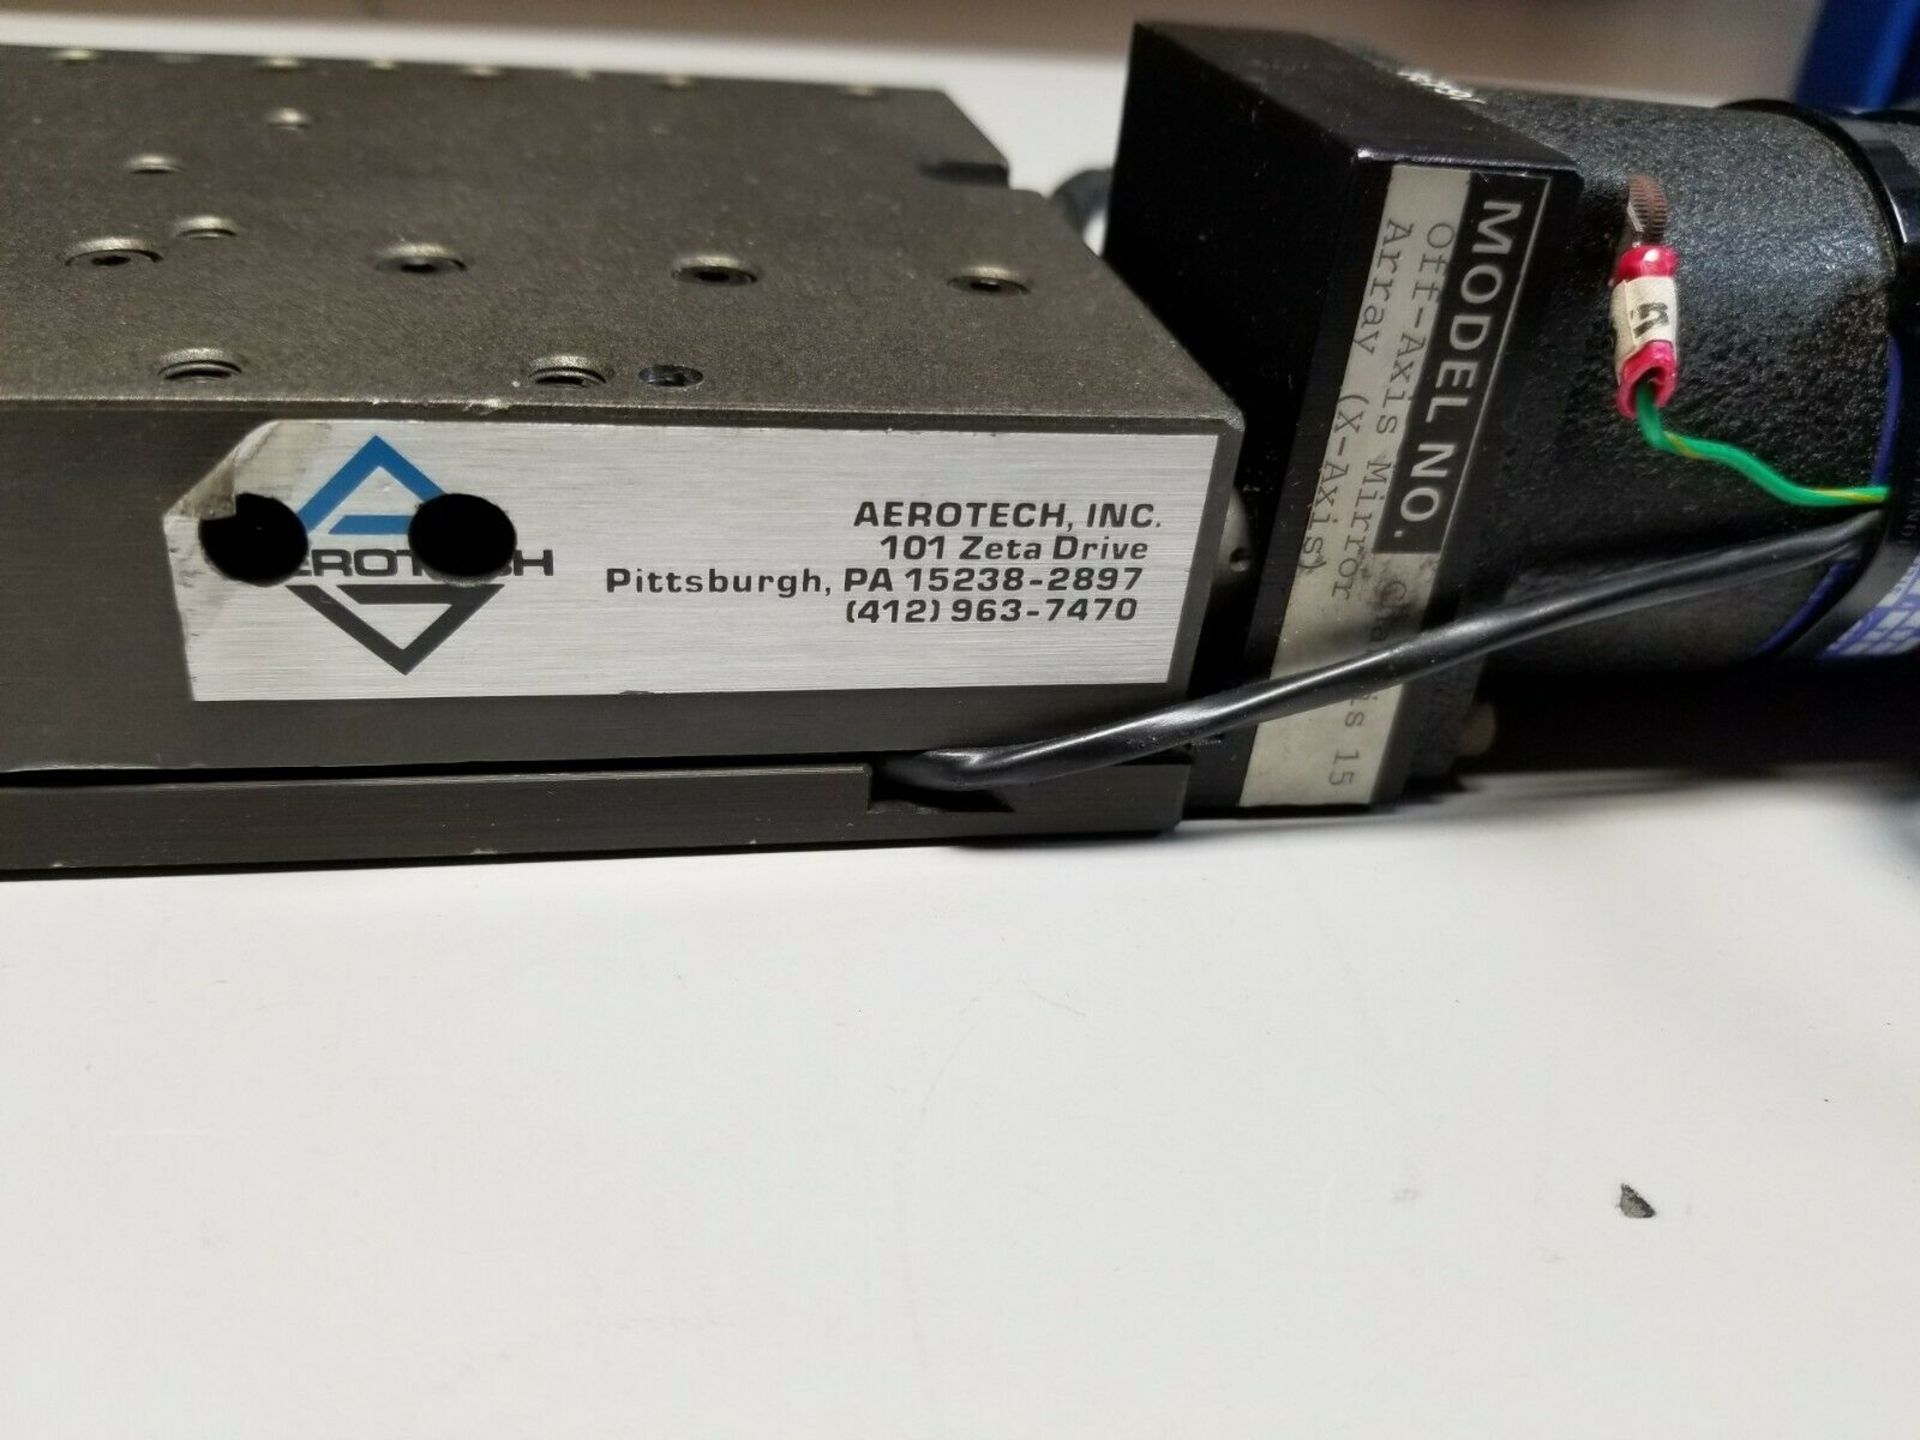 AEROTECH PRECISON LINEAR STAGE POSITIONER WITH STEPPER MOTOR & ENCODER - Image 3 of 11